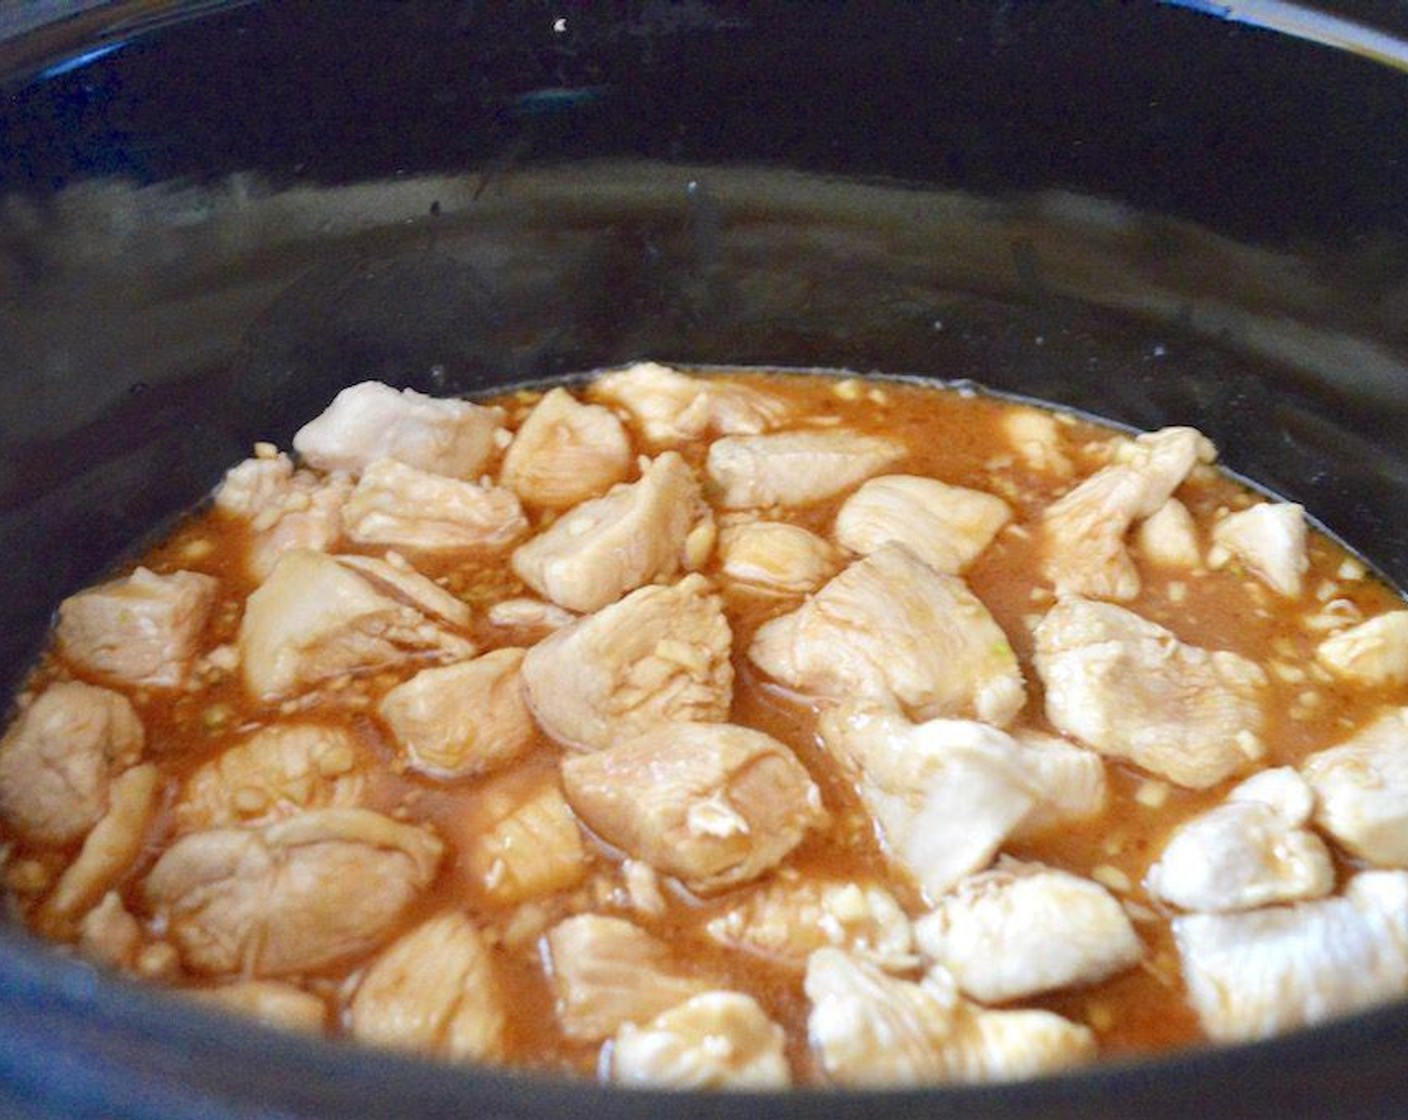 step 3 Mix the remaining Corn Starch (2 Tbsp) with the Water (1/2 cup) to create a slurry and pour it into the slow cooker with the chicken. Add the Garlic (3 cloves), Low-Sodium Soy Sauce (1/2 cup), Honey (1/3 cup), Sesame Oil (1 Tbsp), and Rice Vinegar (1/3 cup). Stir it all together and turn the heat to low. Seal the slow cooker and let it all cook for 3 hours.